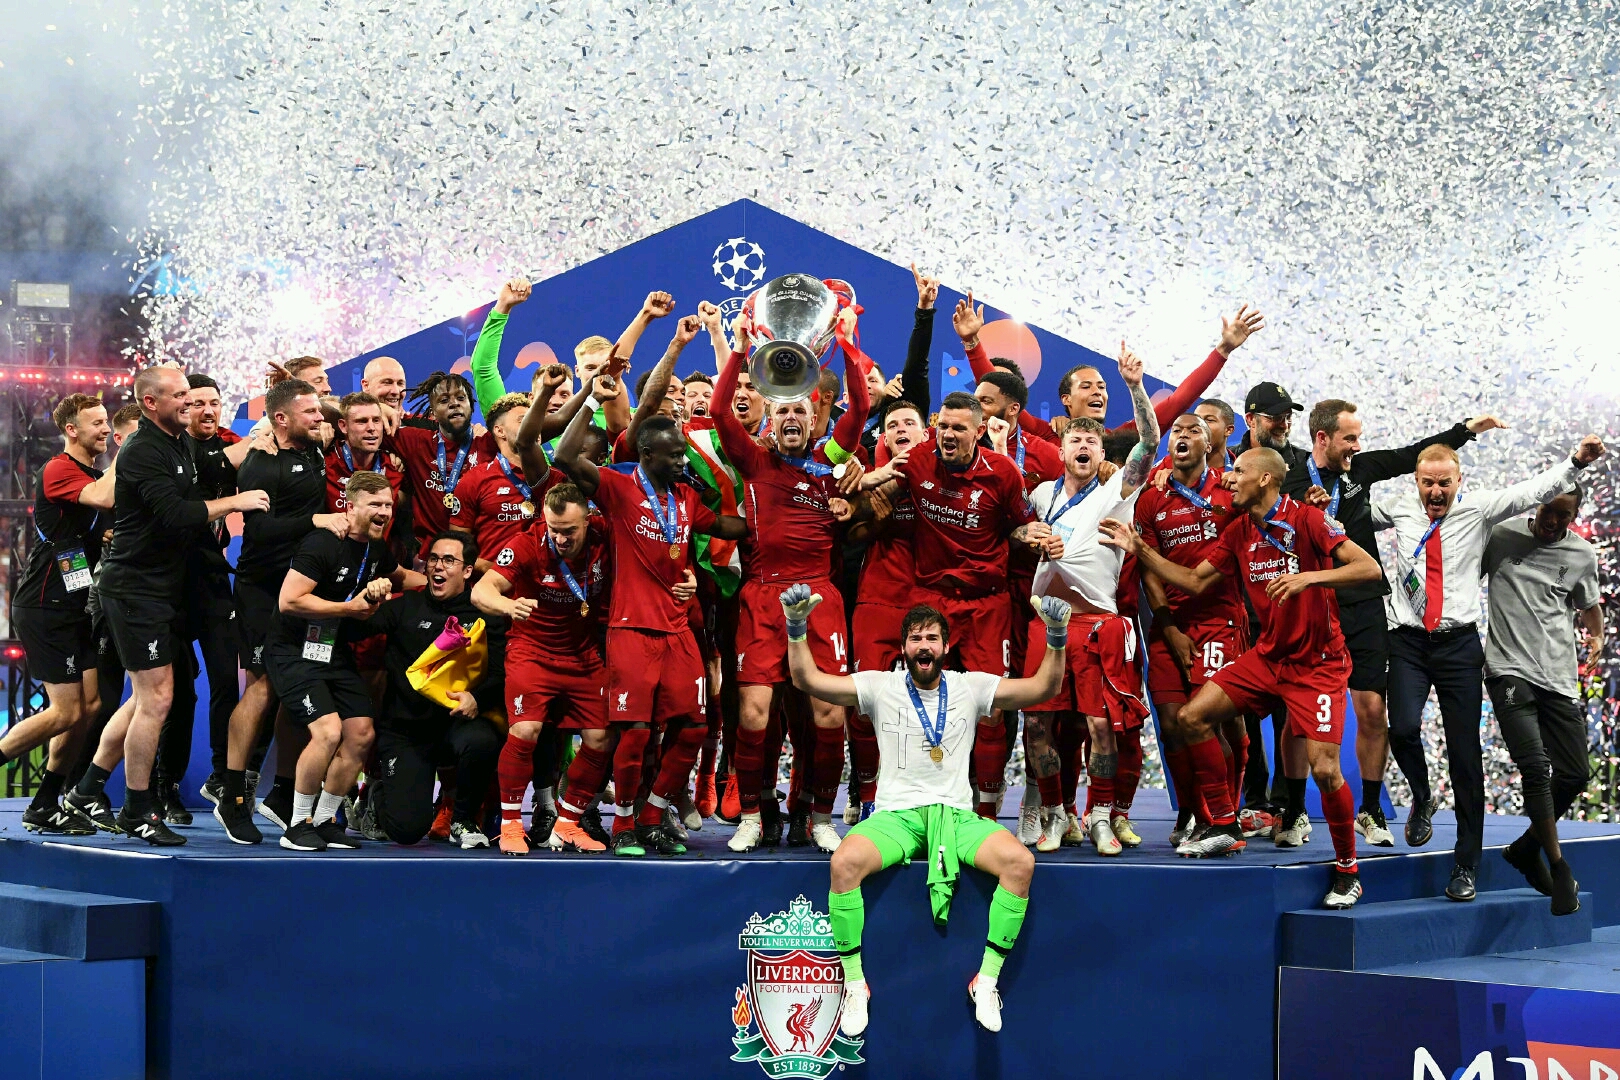 Liverpool are Champions of Europe after 2-0 win over Tottenham in UCL final